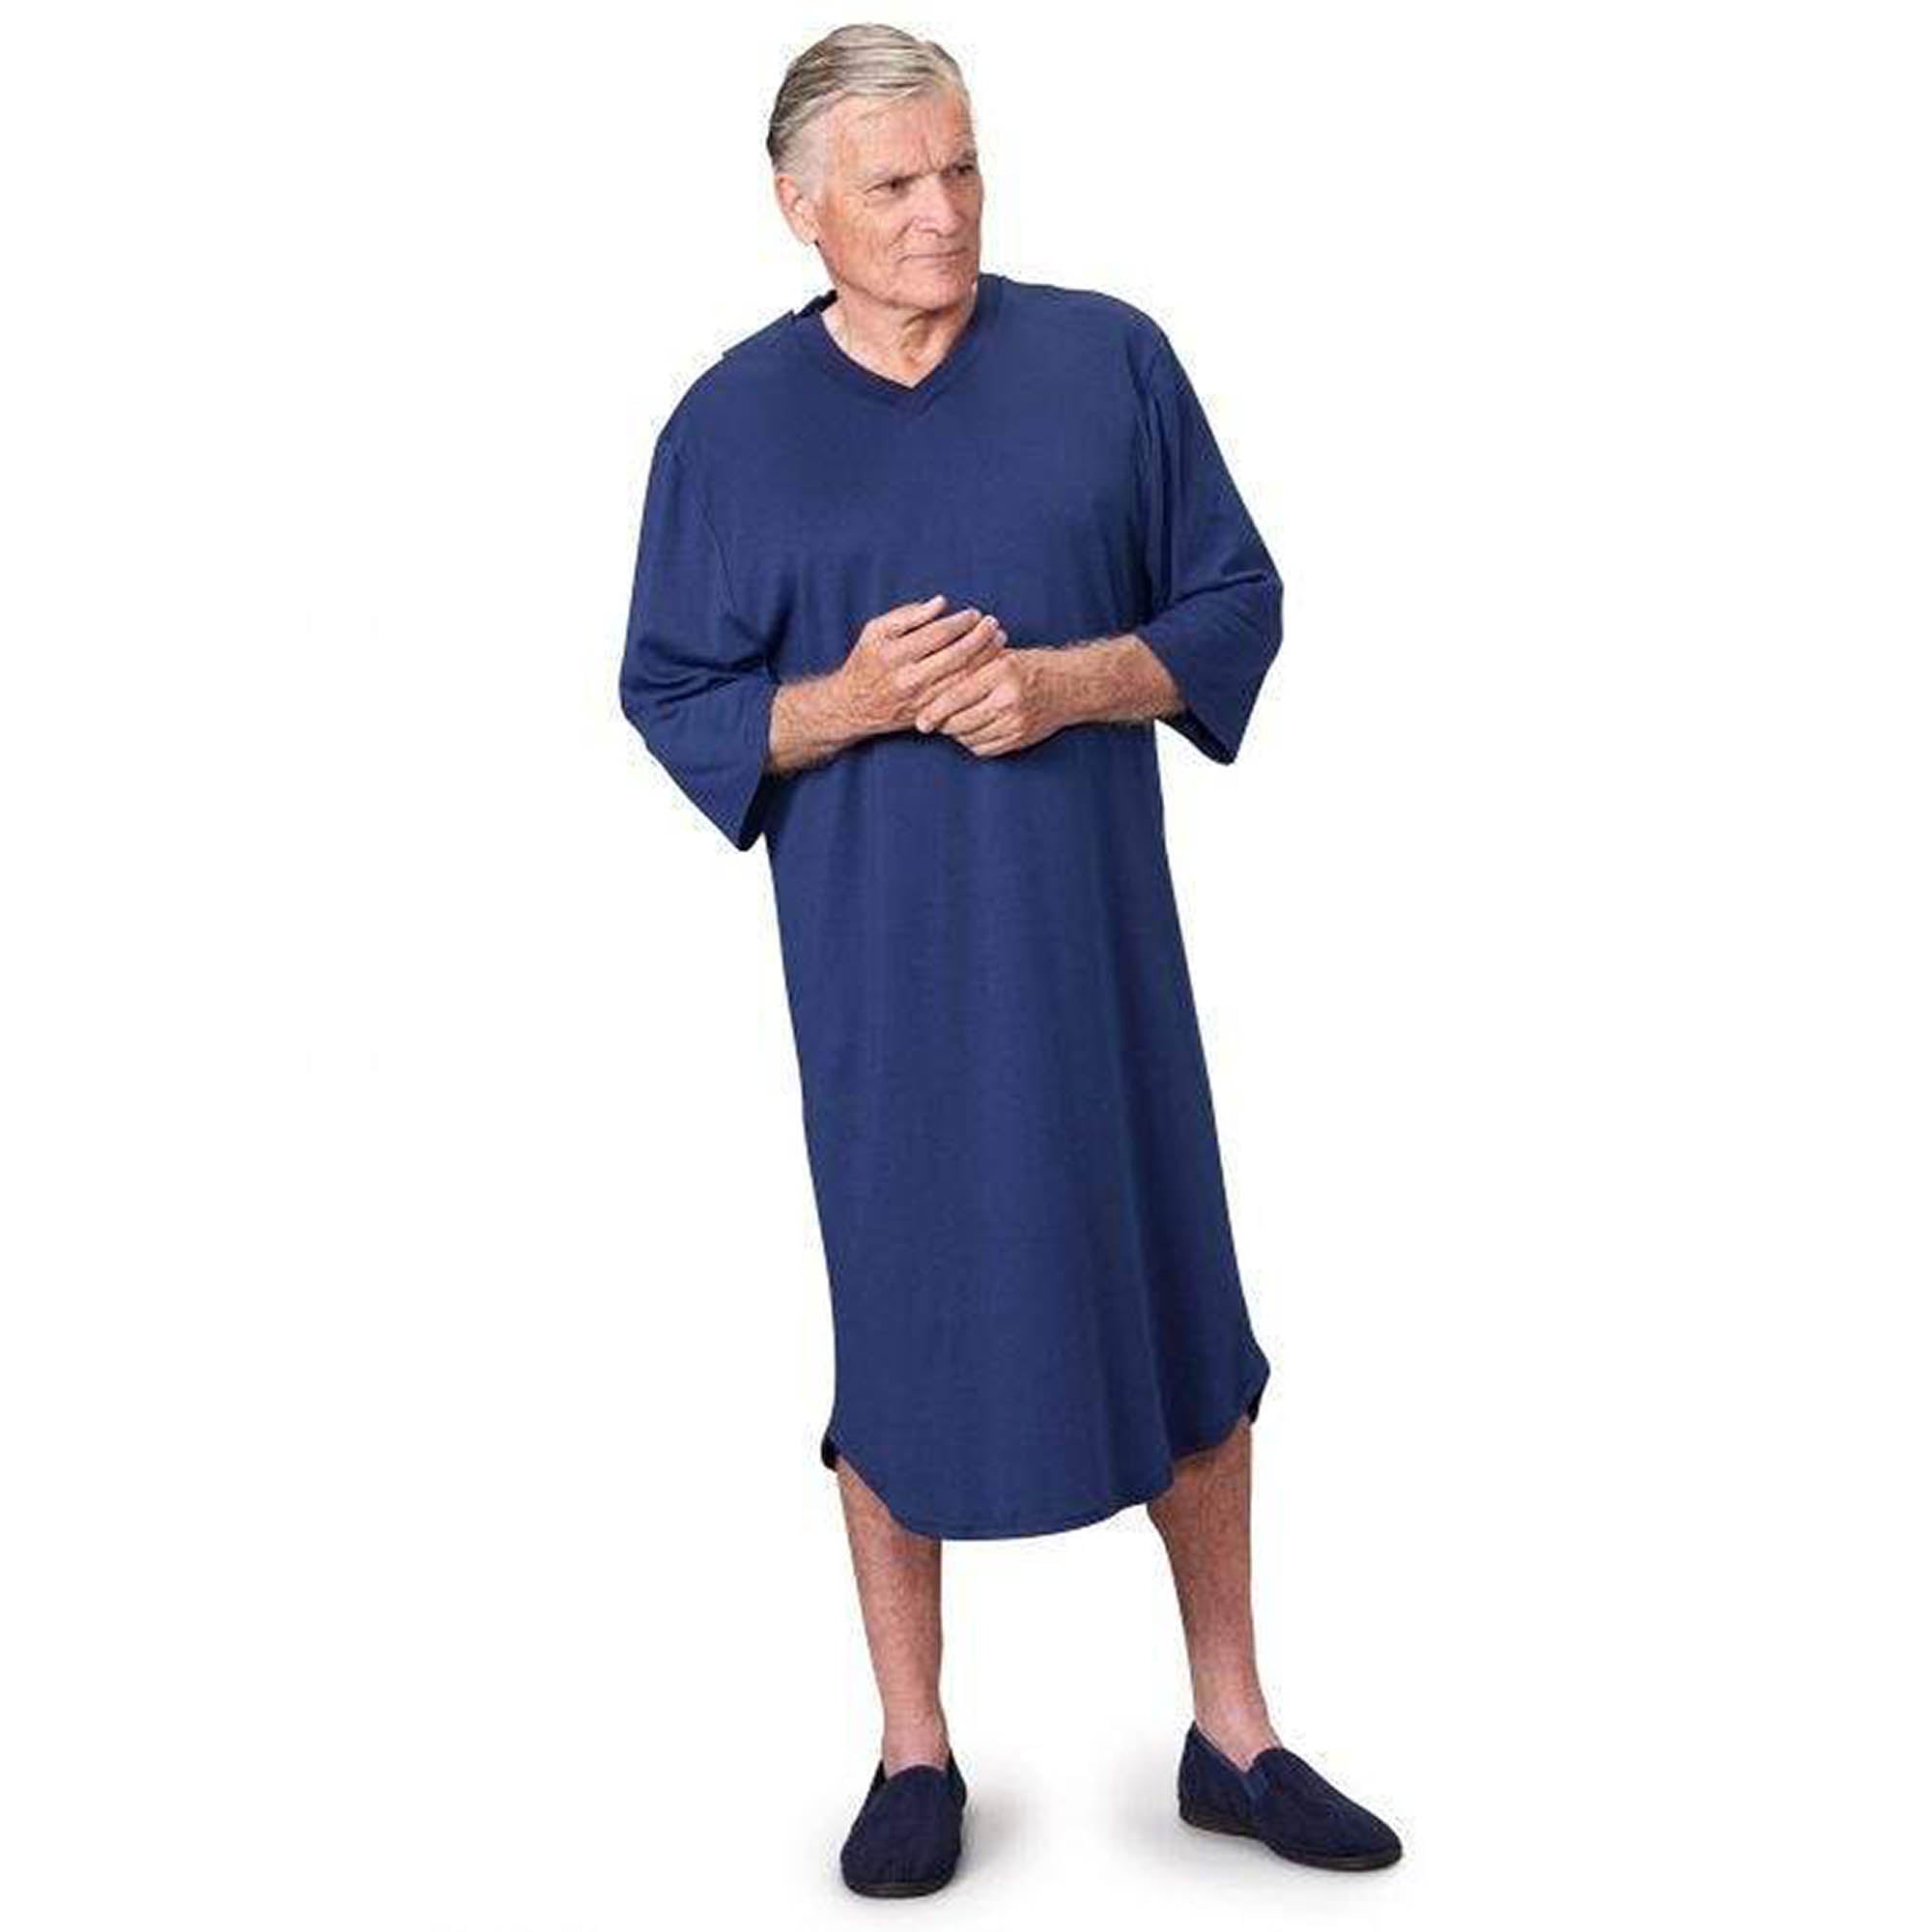 Silverts Men's Open Back Antimicrobial Nightgown - Royal - L